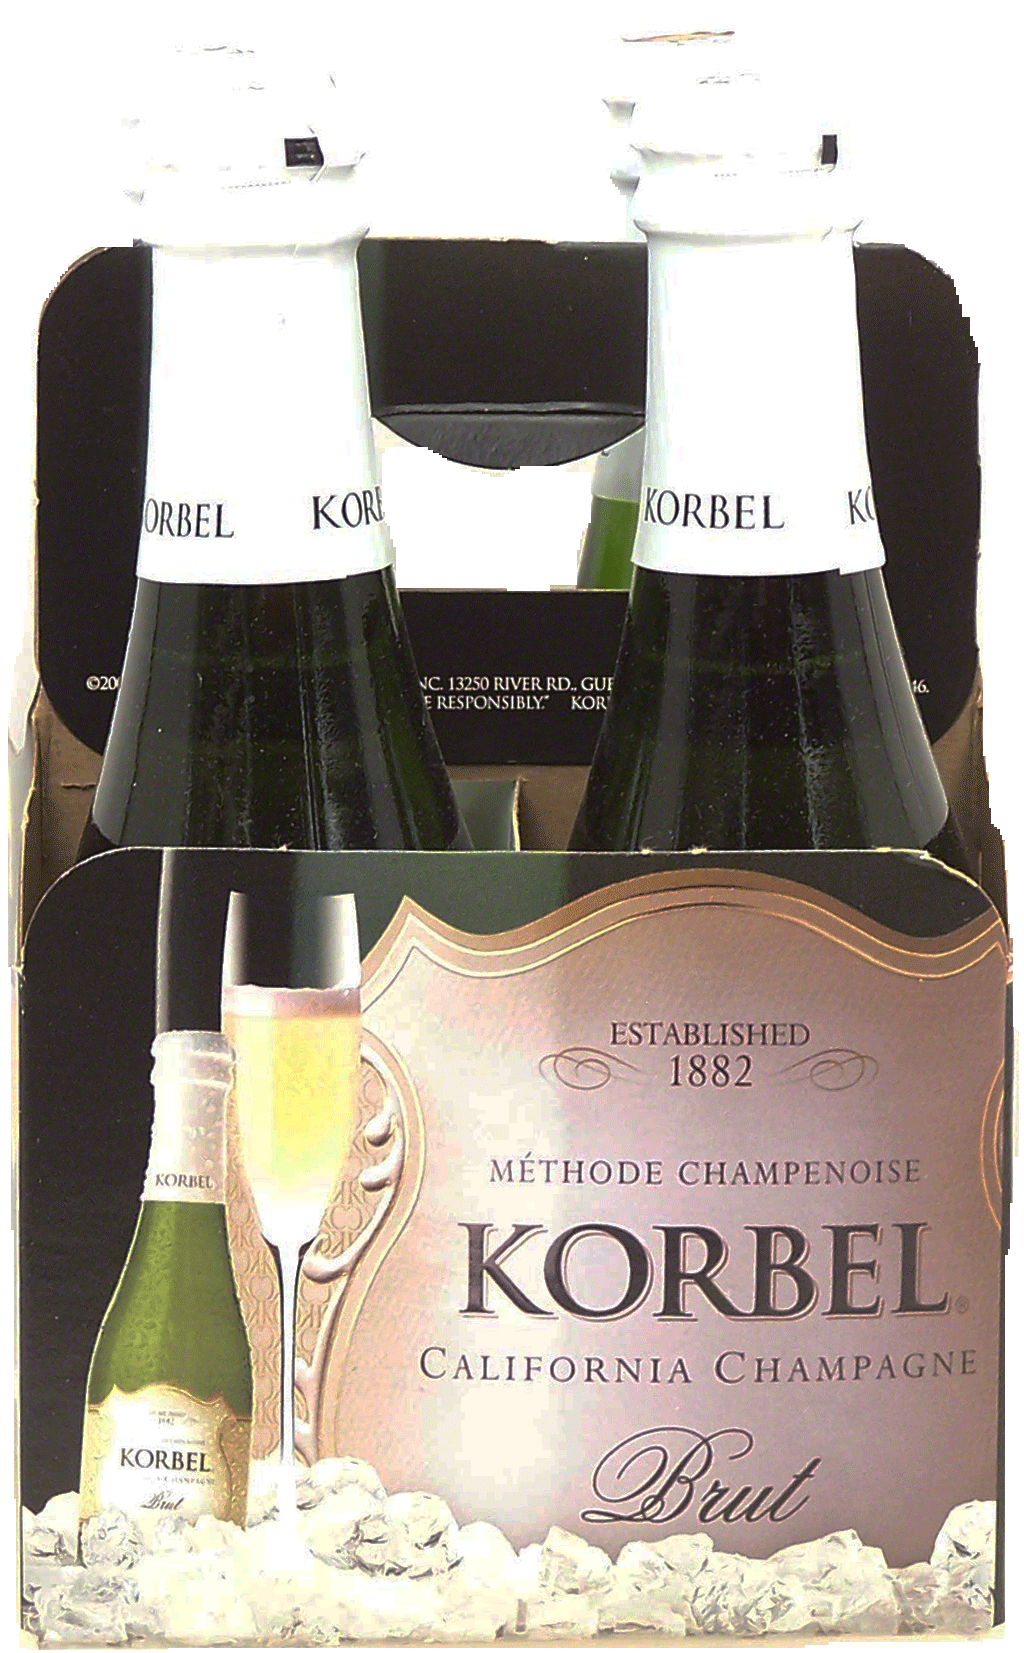 Korbel Methode Champenoise Brut; champagne of California, 12% alc. by vol., 187-ml single serve Full-Size Picture